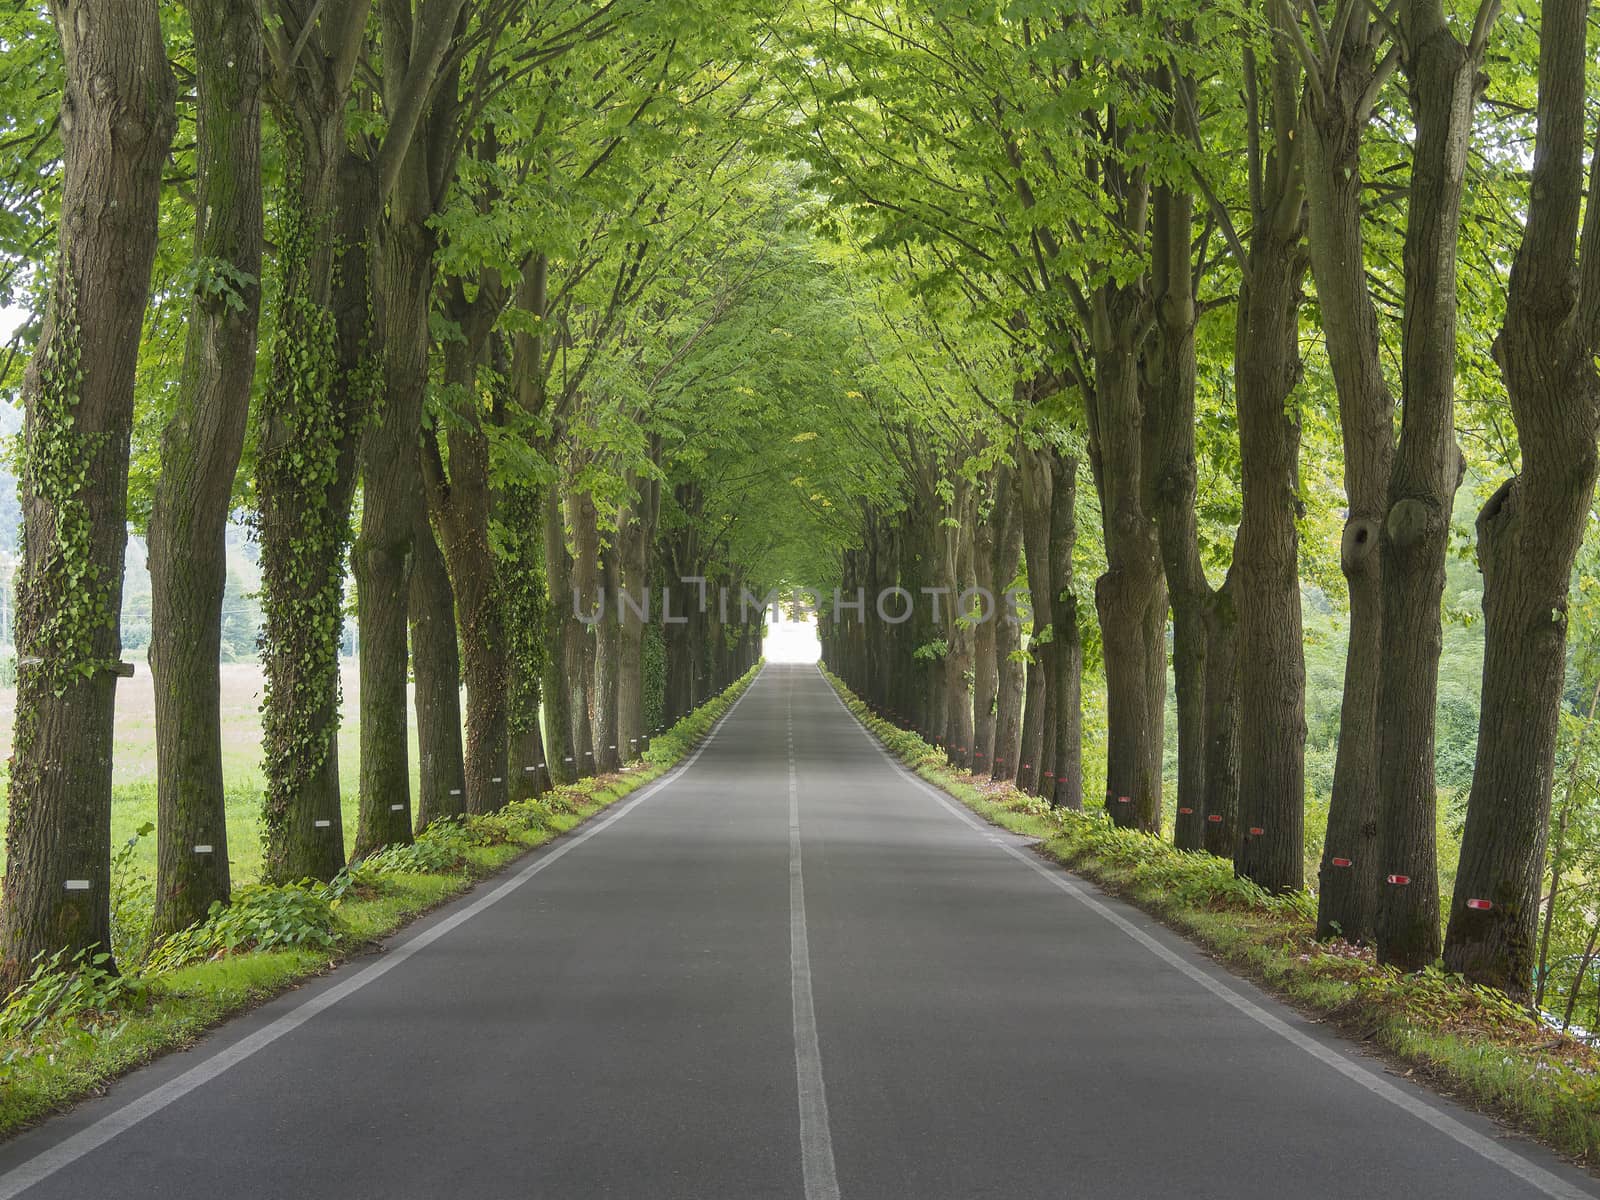 Tree lined country road during a summer day in Tuscany